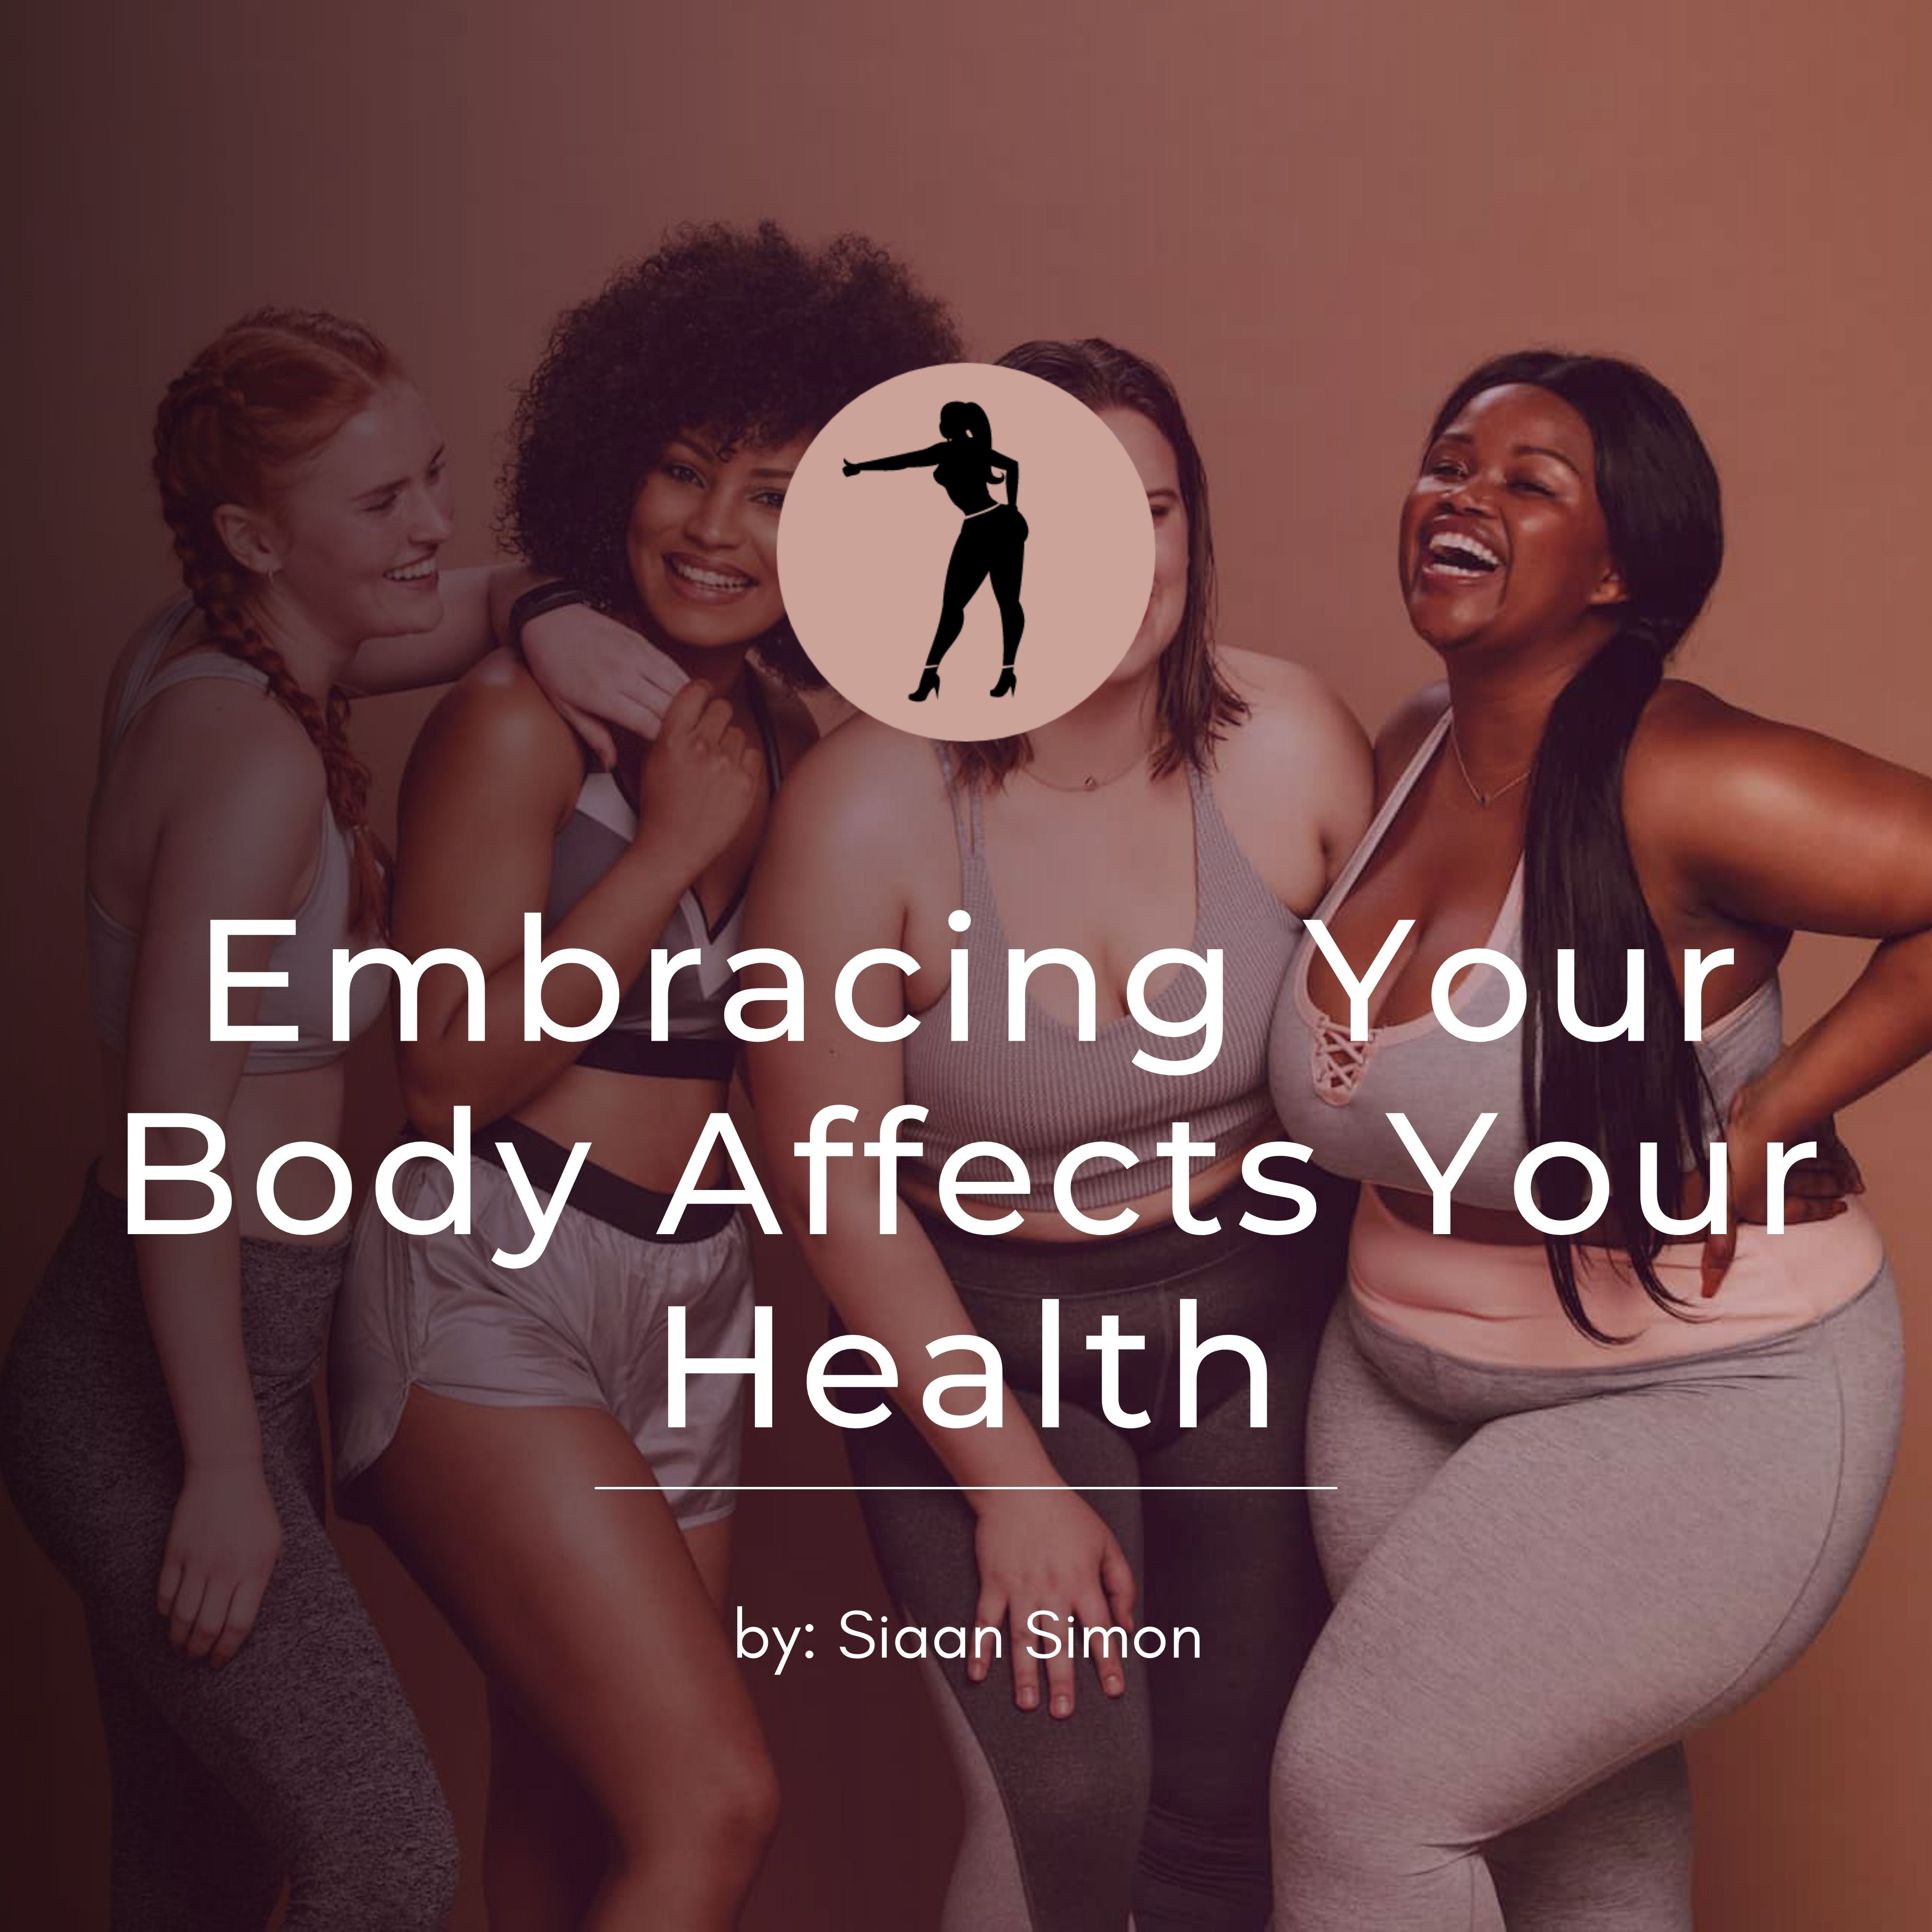 Embracing Your Body Affects Your Health